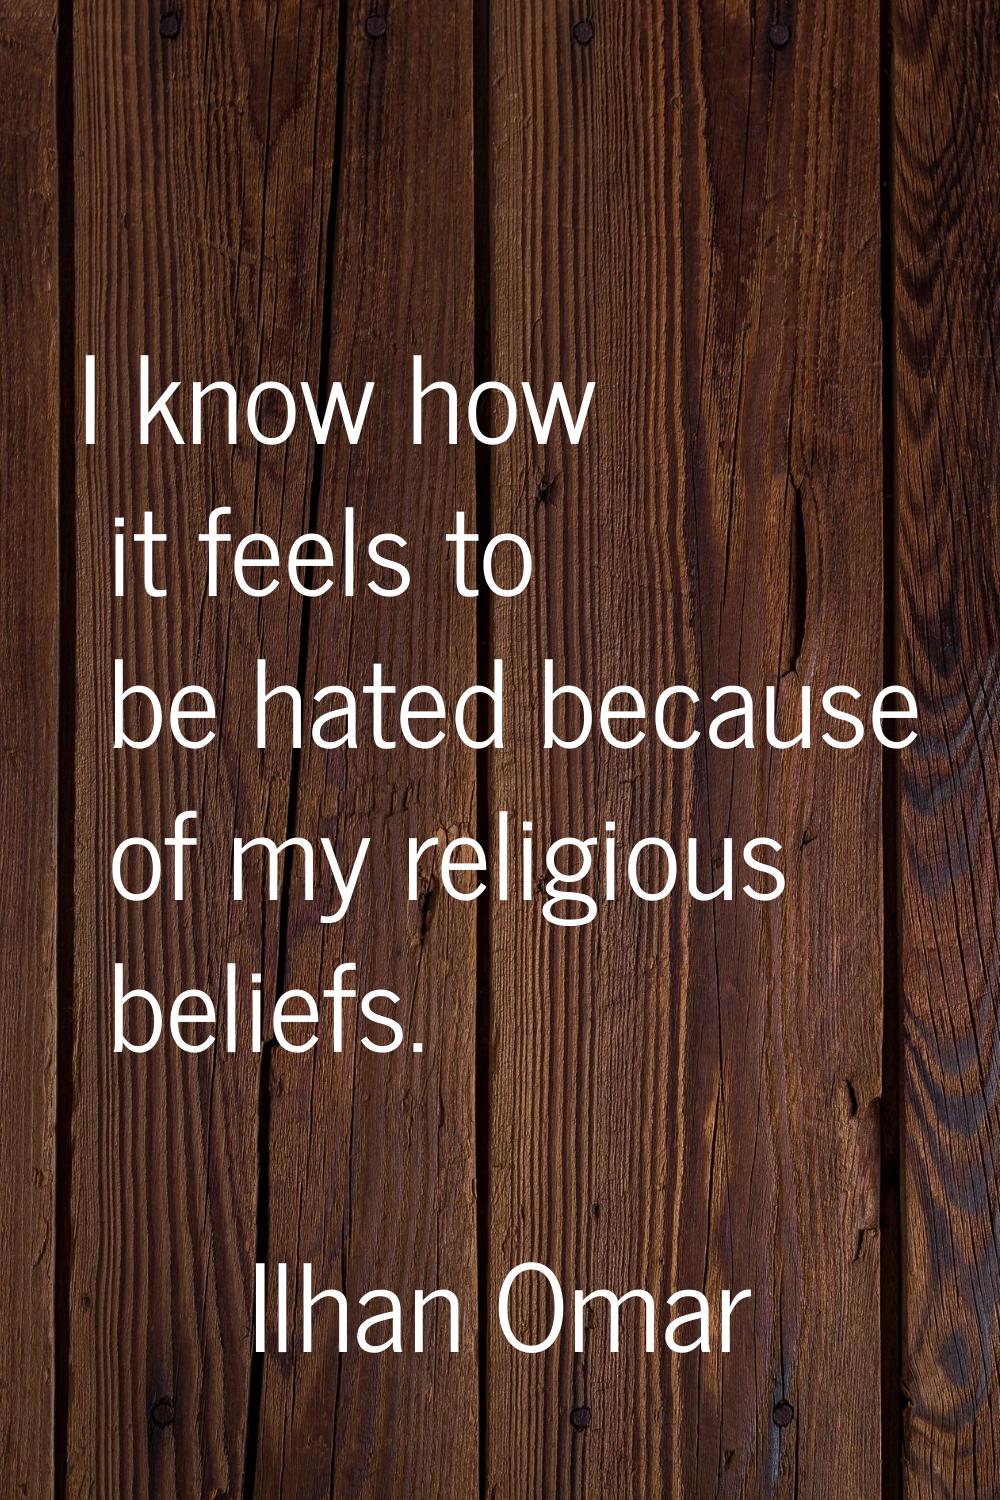 I know how it feels to be hated because of my religious beliefs.